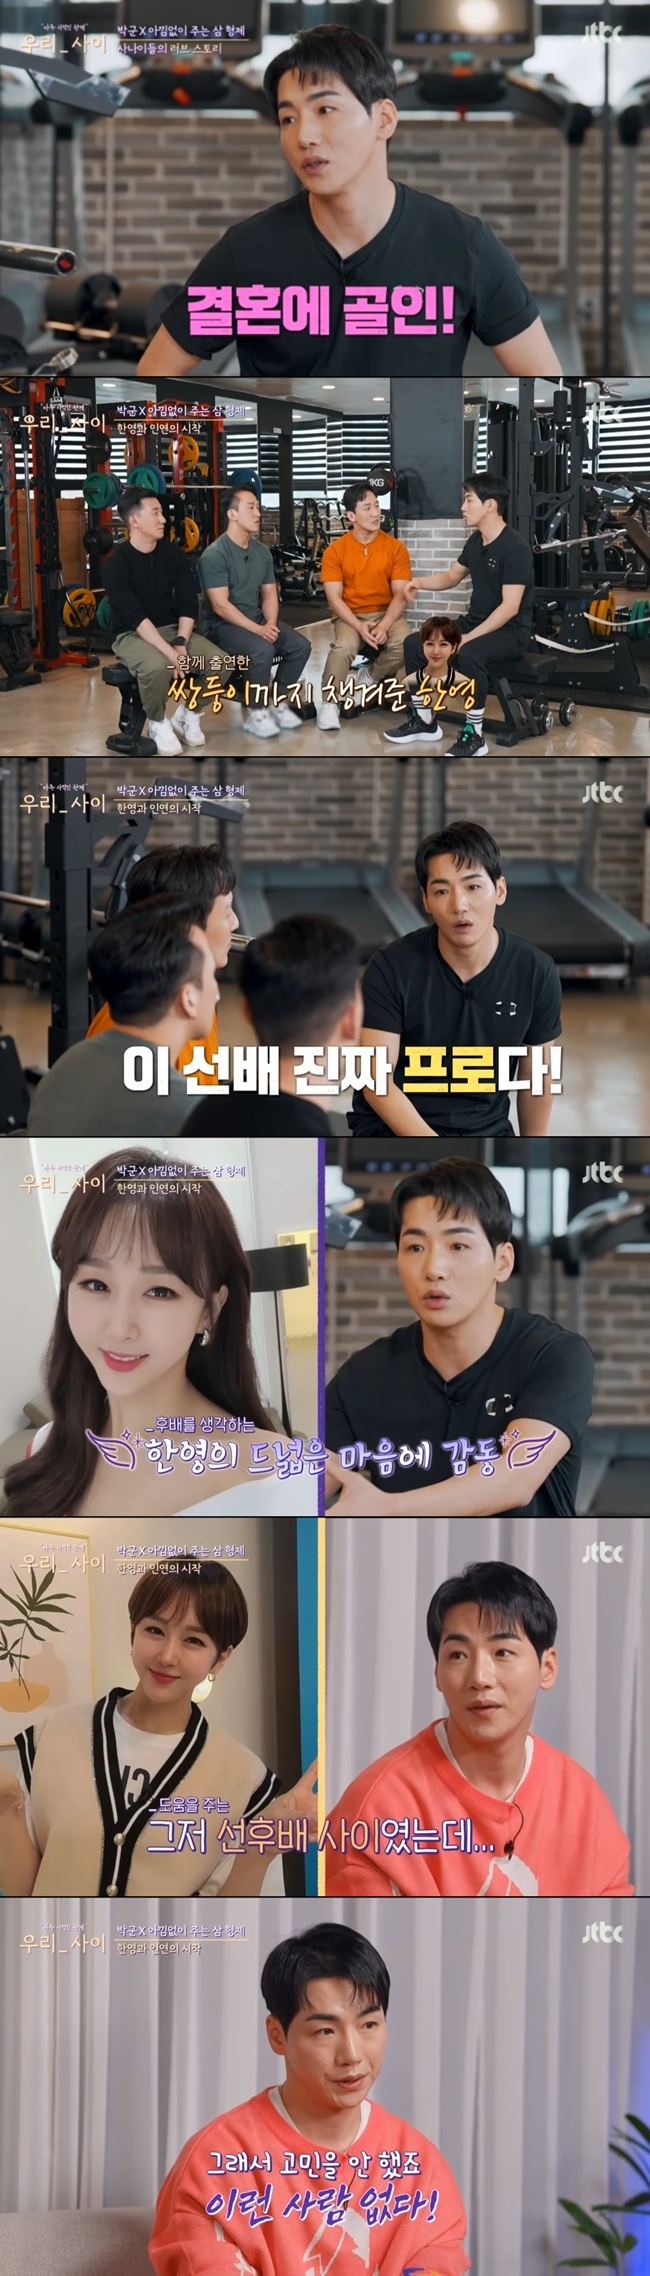 Singer Park revealed his infinite affection for the bride Han Young.In JTBC We Between broadcast on April 18, Sai MC Park talked deeply with Friend Park Ji-yoon, a special motive.Park, a prospective groom who is about to marry Han Young on the 26th, said, The original privilege is a fast-track, and the marriage has also entered a fast-track.Lee Yong-jin asked, Do not you fight a lot before marriage? Park said, If you were going to fight, you would not have married. If you were going to fight, you would not have thought of this person.I love it so much (Han Young) that I picked it up because I like roses, and I make hearts even when I eat, he said.Park Friend Park Ji-yoon also mentioned Park and his twin brother, saying that he wanted to meet someone.Park said, Ji Yoon Lee is a brother, a parent, and a model behavior who wants to meet such a person.I didnt think there was anyone like that, but now I do. I really couldnt go to the market. I was looking for him. Its more like Model Behavior than youve found, he added.Han Young Mitham was also reported: The twin brothers appeared on Han Youngs program with Park, and Han Young gave him allowance for suffering.Park said, At that time, I thought that this senior was really a professional. I thought, I am MC, I suffer from my program.Did you ask me if I had a heart later? Park said, I did not. I was just a junior at the time.I do not have a place because of Corona 19, and I do not have a job. When asked about the moment he decided to marry, Park said, It was hard enough to quit and go back to the army. I gave a lot of advice and it was a lot of power next to me.I thought there was no such person, he said.